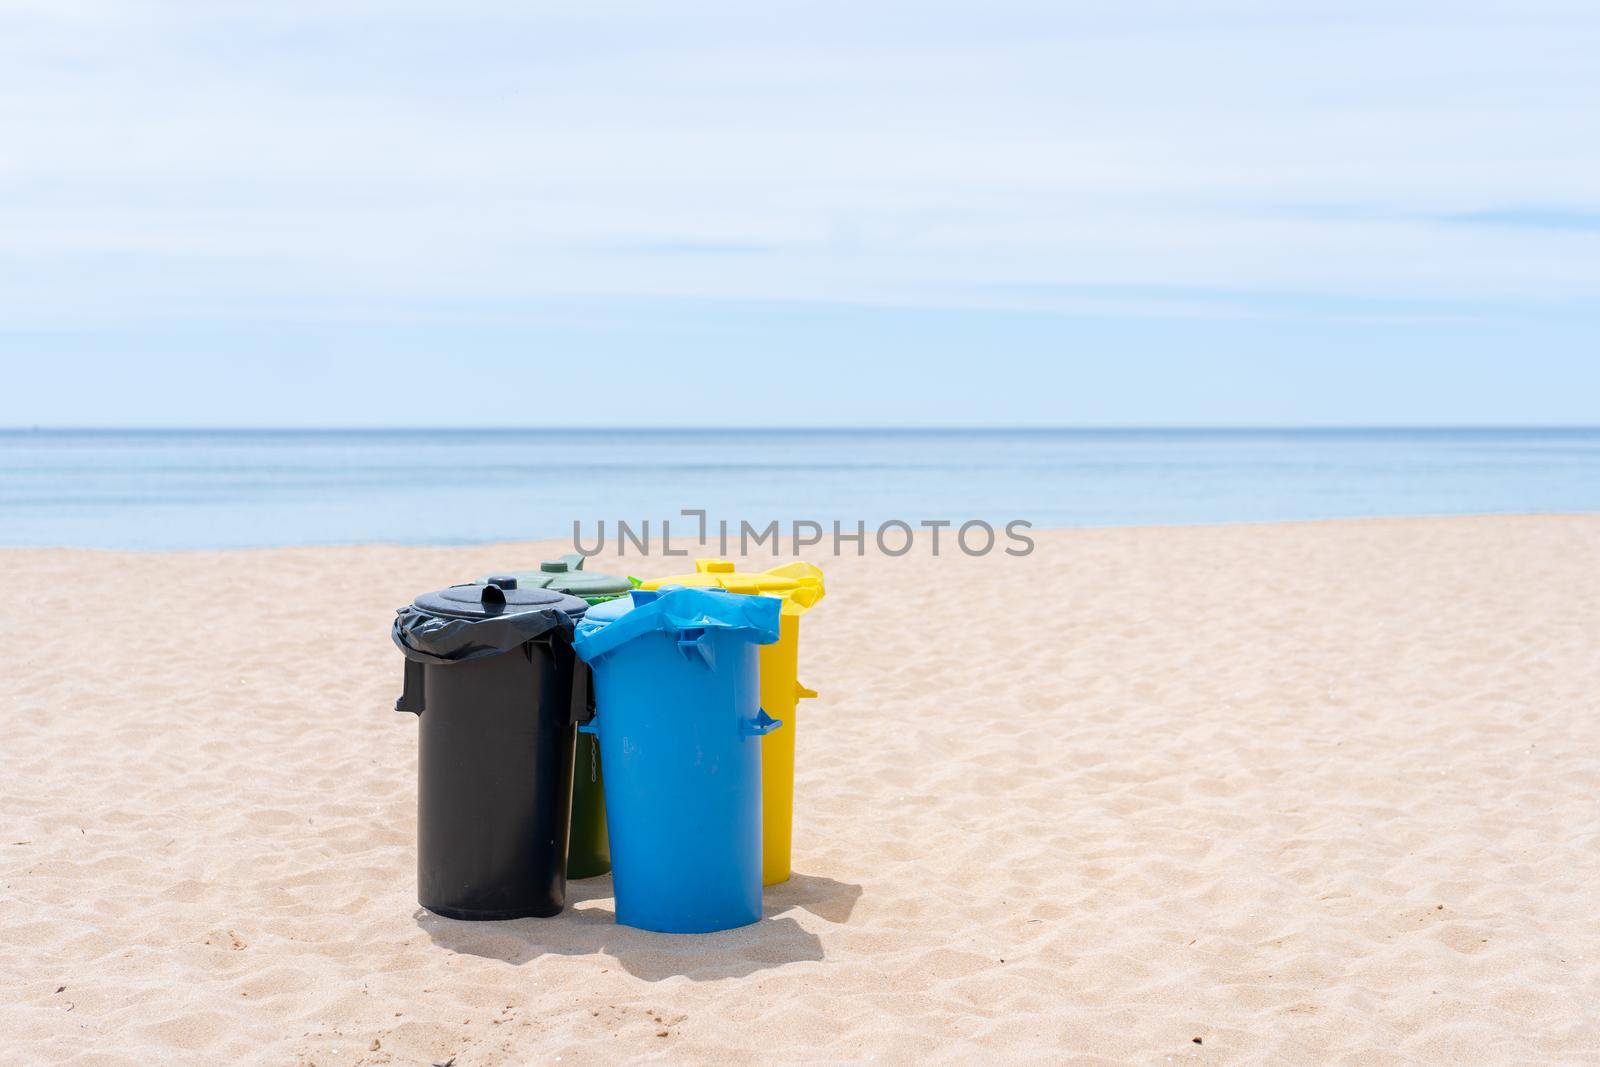 Clean beach garbage bins. Multi colored garbage containers for separate collection of garbage stand on empty beaches near the ocean